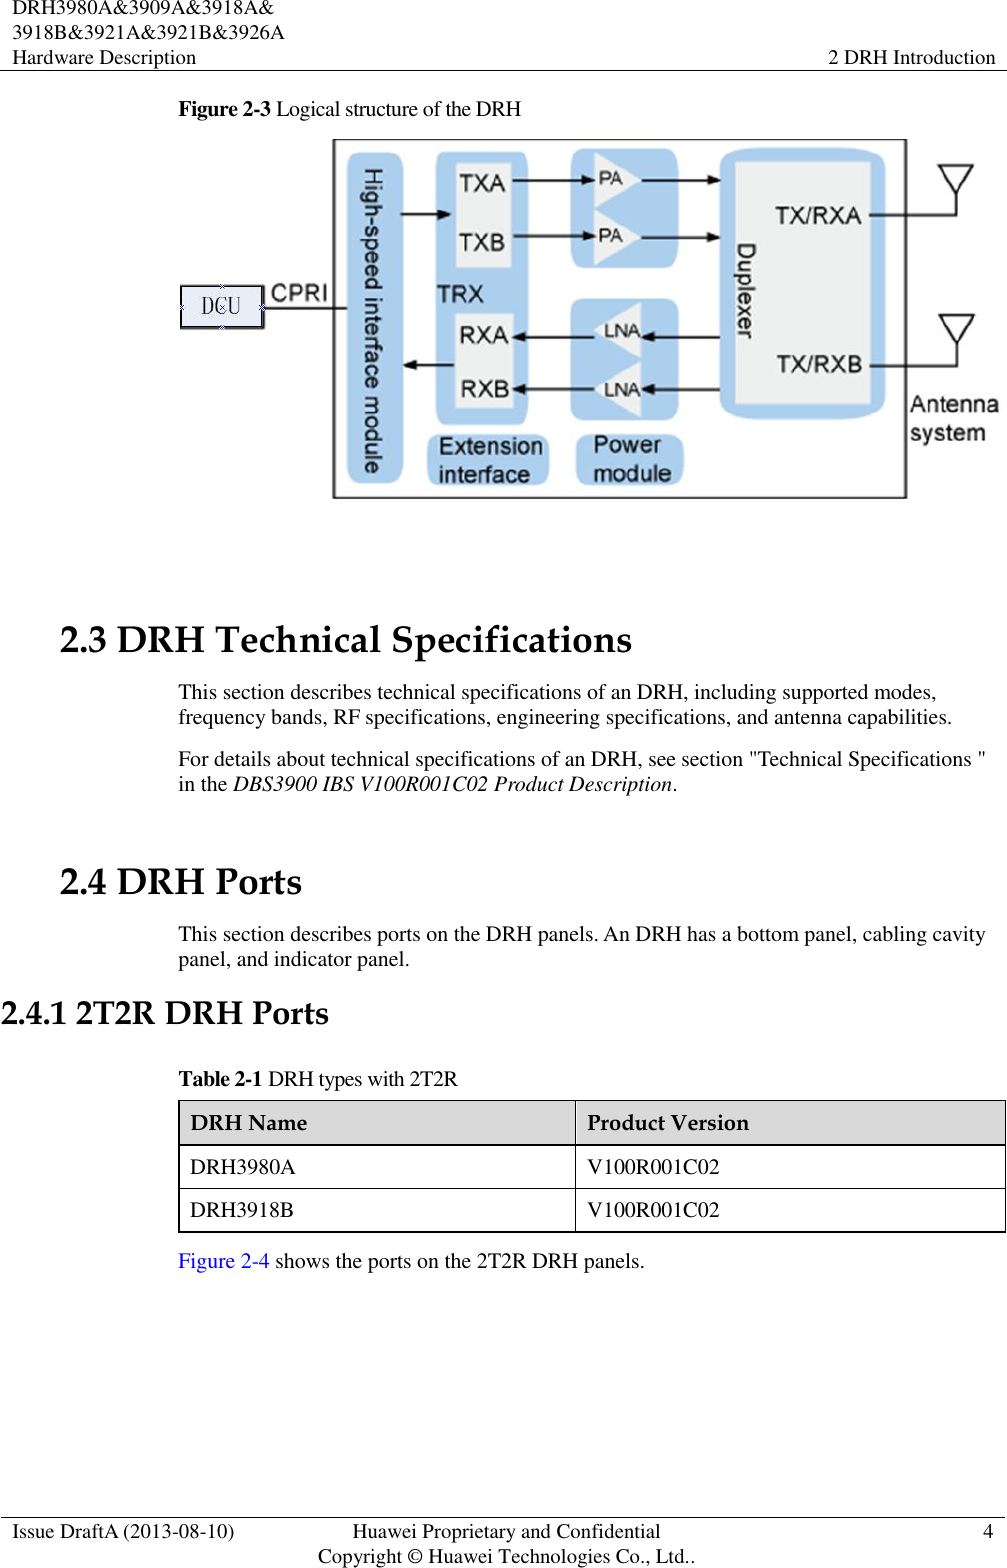  DRH3980A&amp;3909A&amp;3918A&amp; 3918B&amp;3921A&amp;3921B&amp;3926A Hardware Description   2 DRH Introduction  Issue DraftA (2013-08-10) Huawei Proprietary and Confidential                                     Copyright © Huawei Technologies Co., Ltd.. 4    Figure 2-3 Logical structure of the DRH  2.3 DRH Technical Specifications This section describes technical specifications of an DRH, including supported modes, frequency bands, RF specifications, engineering specifications, and antenna capabilities. For details about technical specifications of an DRH, see section &quot;Technical Specifications &quot; in the DBS3900 IBS V100R001C02 Product Description. 2.4 DRH Ports This section describes ports on the DRH panels. An DRH has a bottom panel, cabling cavity panel, and indicator panel. 2.4.1 2T2R DRH Ports Table 2-1 DRH types with 2T2R DRH Name Product Version DRH3980A V100R001C02 DRH3918B V100R001C02 Figure 2-4 shows the ports on the 2T2R DRH panels. 